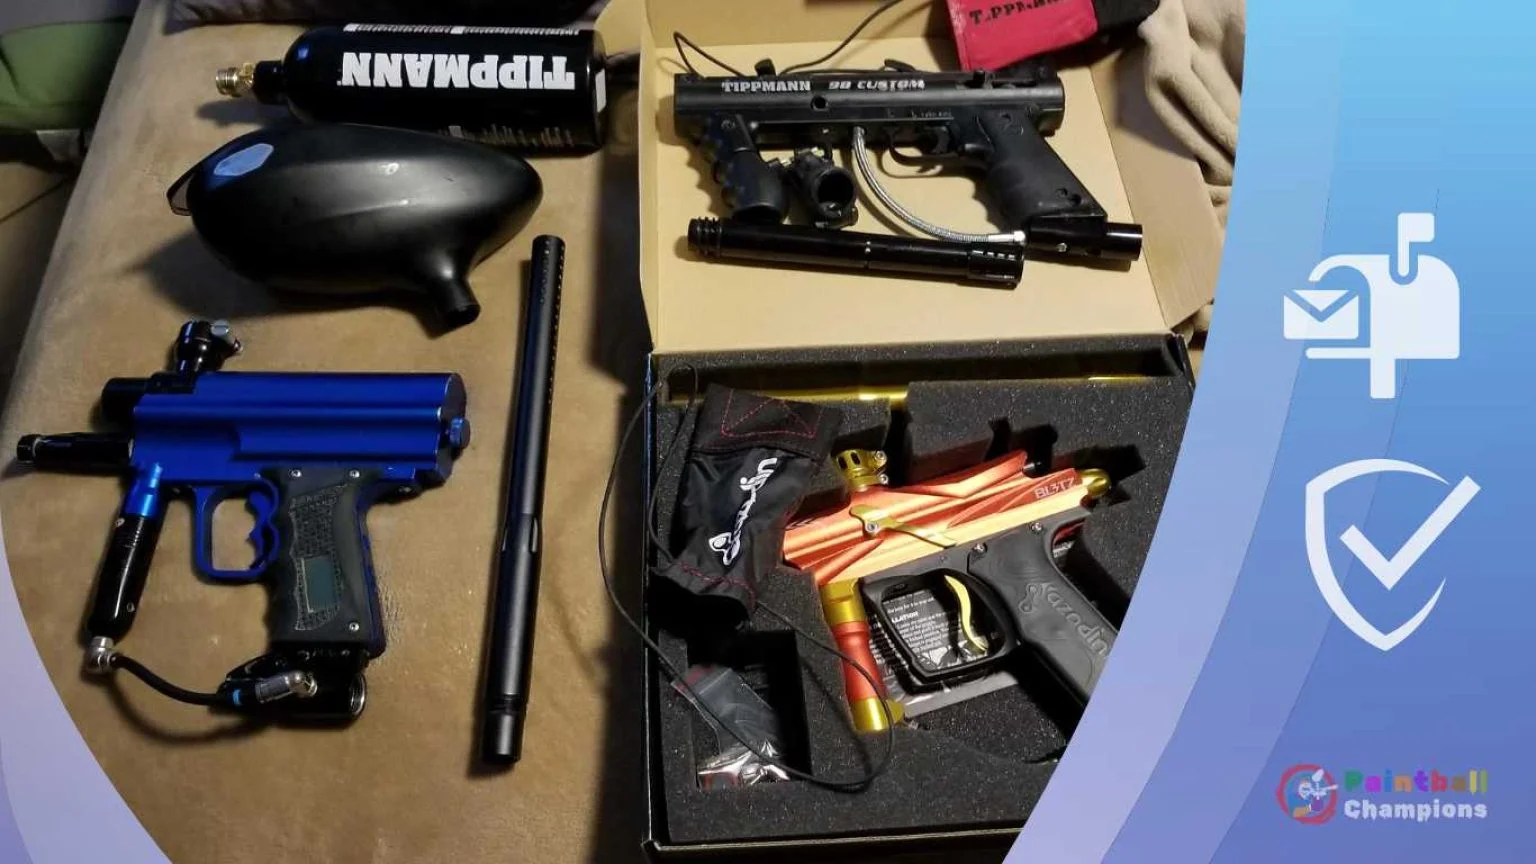 Send a Paintball Gun in The Mail Safely